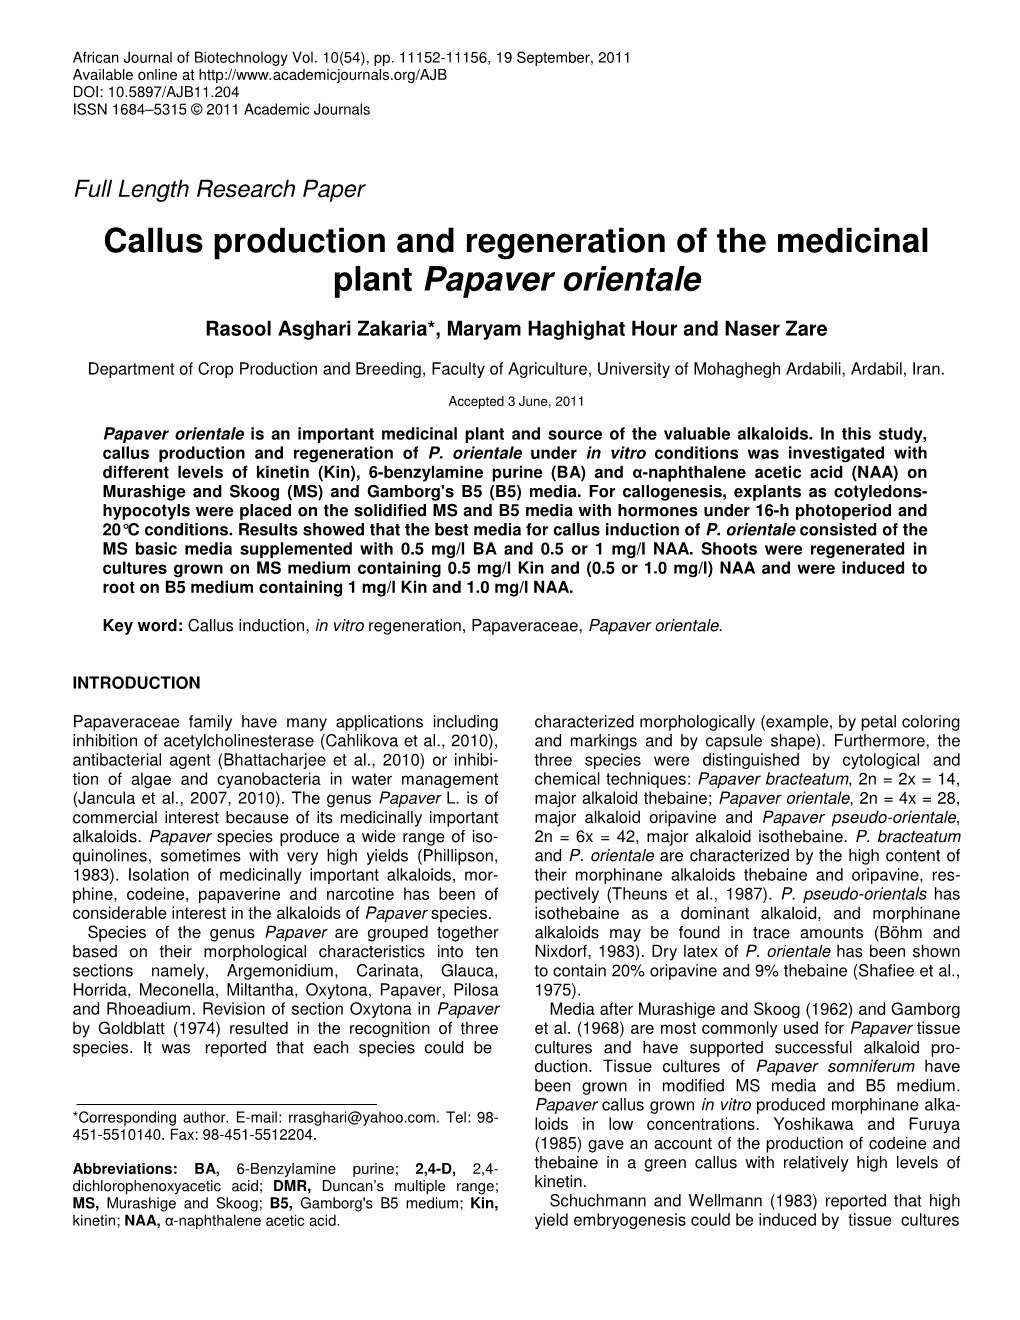 Callus Production and Regeneration of the Medicinal Plant Papaver Orientale